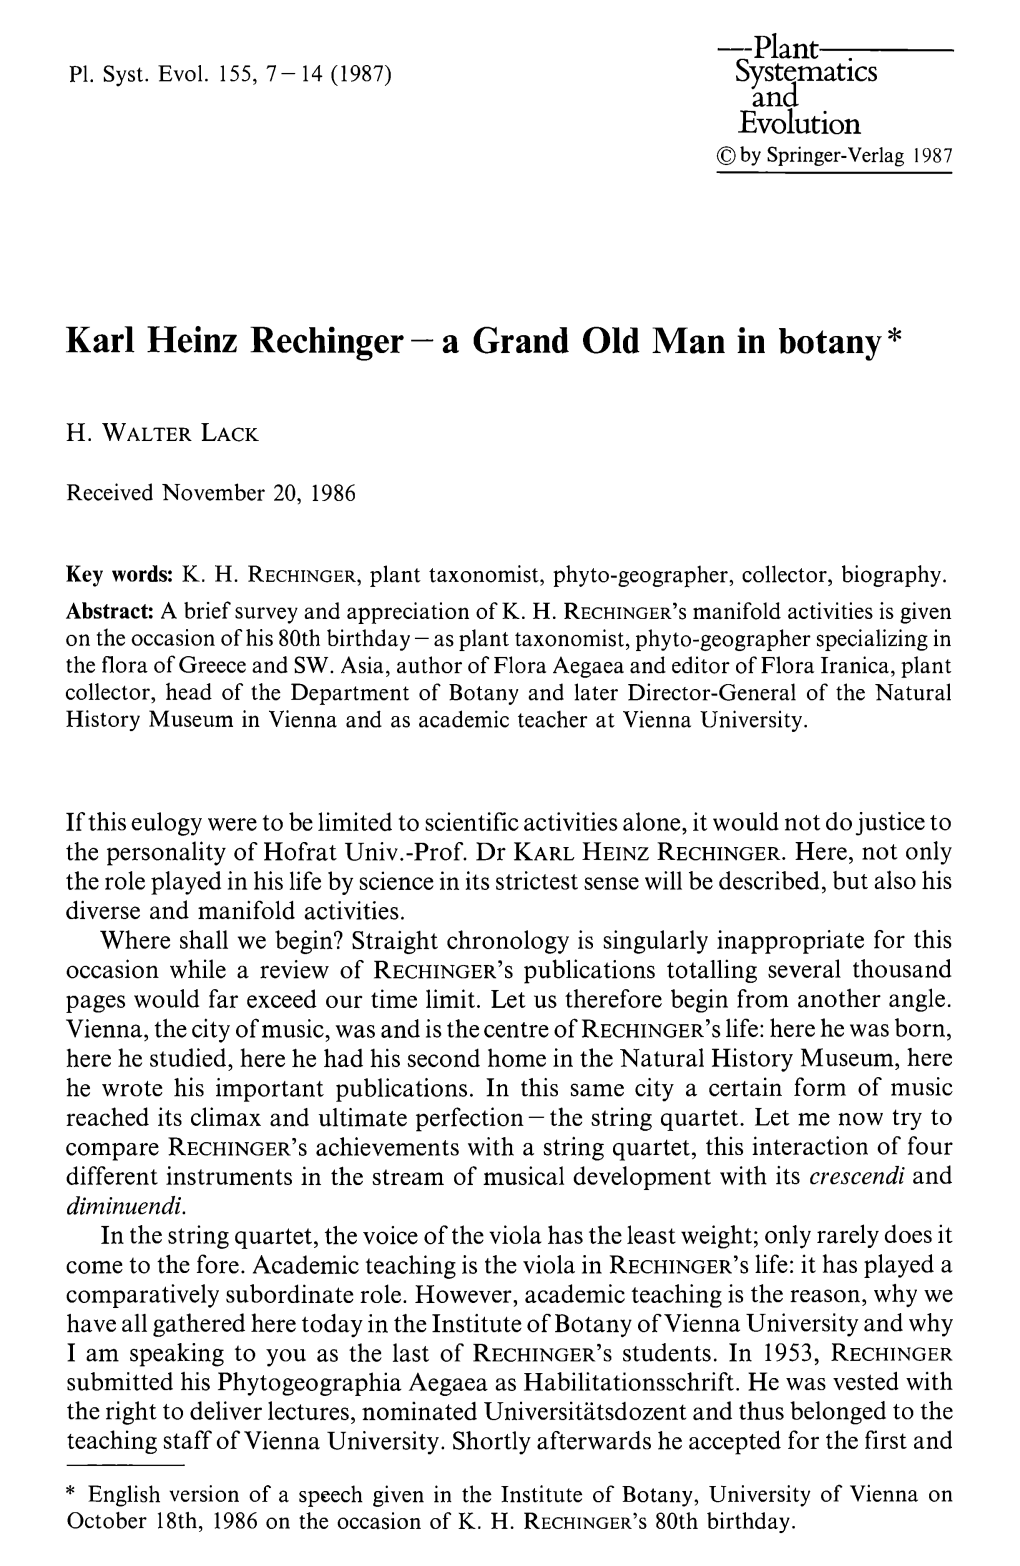 Karl Heinz Rechinger —A Grand Old Man in Botany*